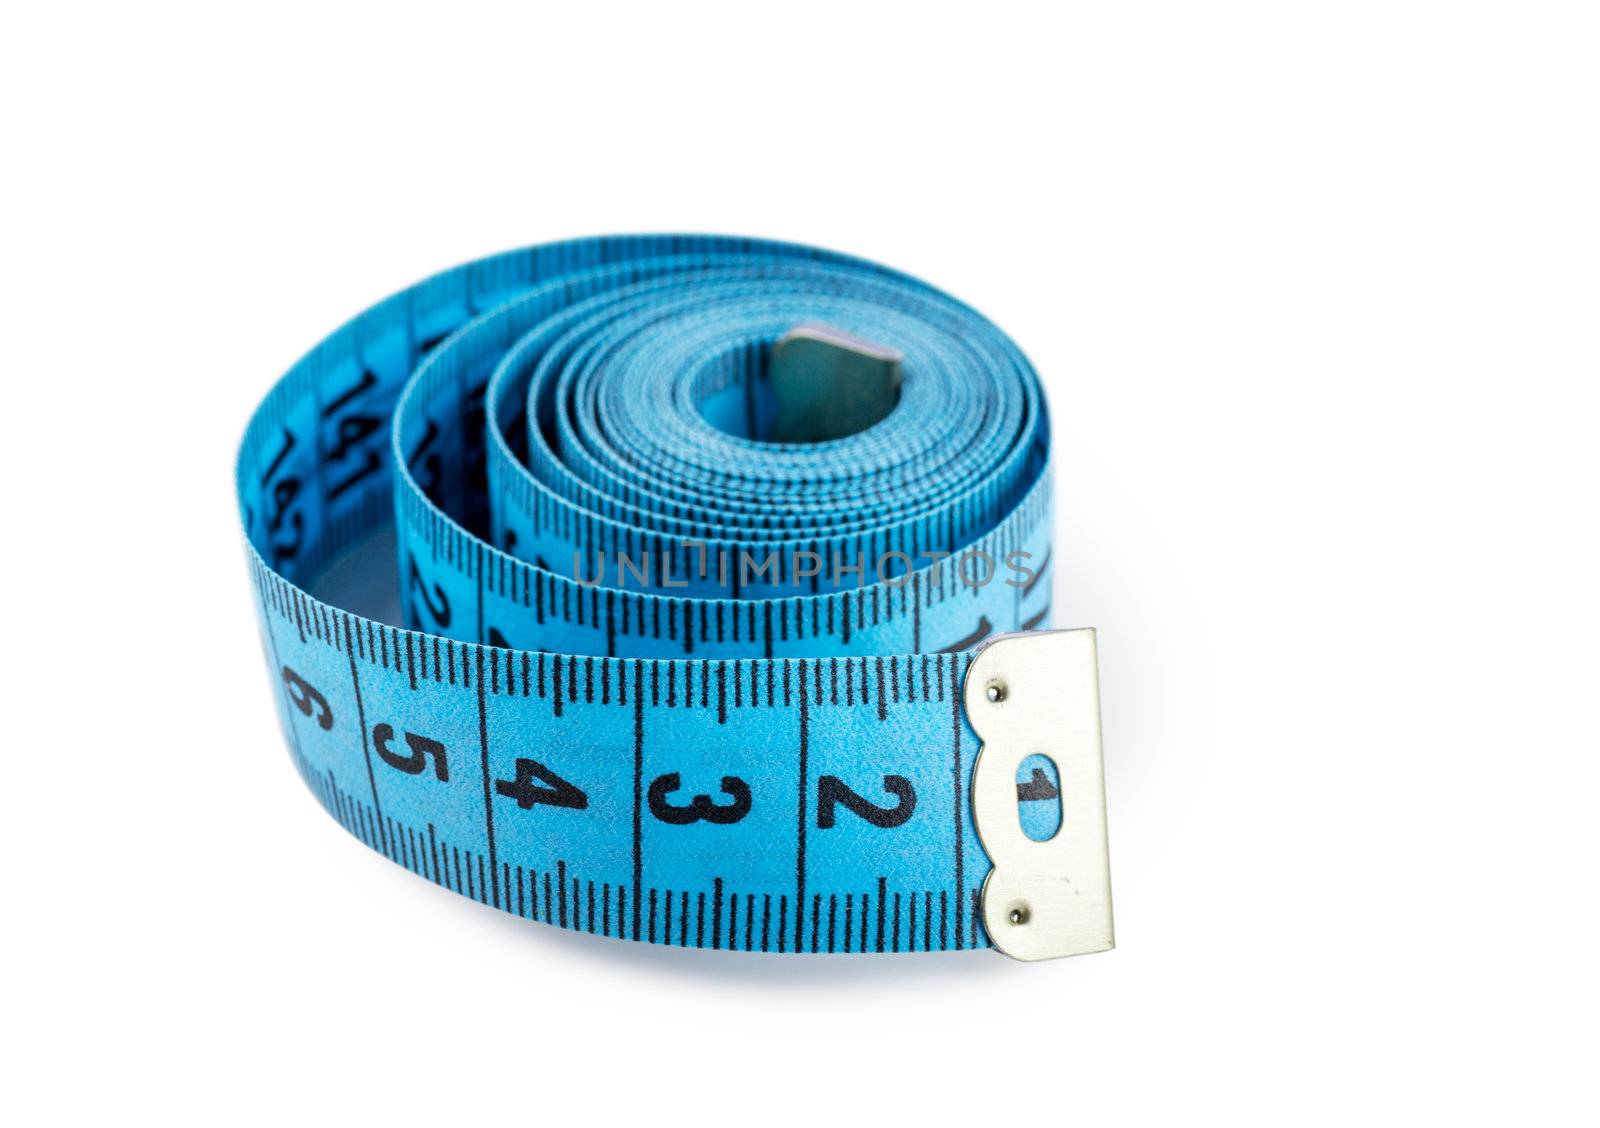 Measuring tape by AGorohov